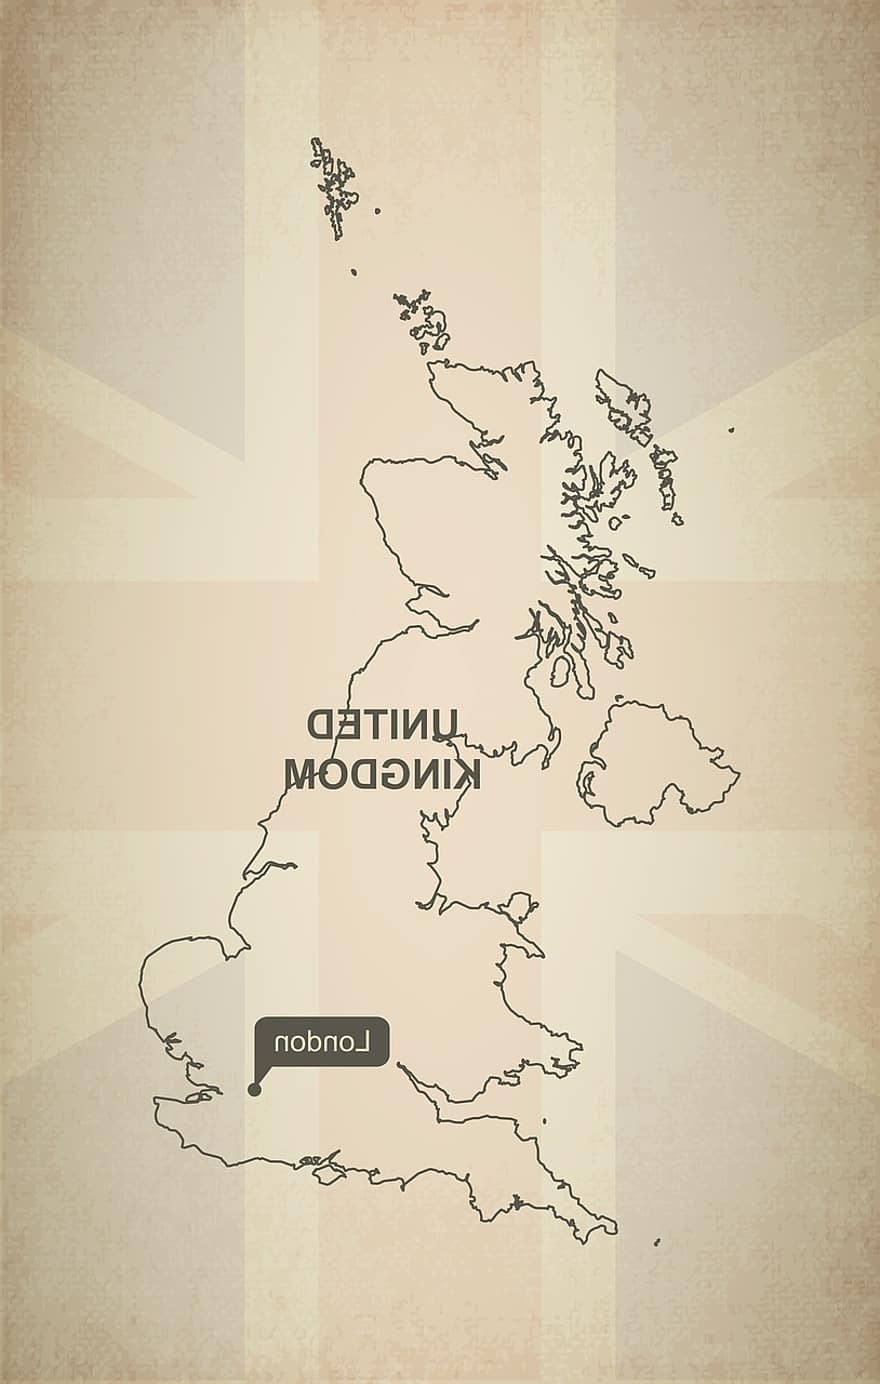 Outline, Map, United Kingdom, Geography, Country, Maps, Europe, Accurate, Flag